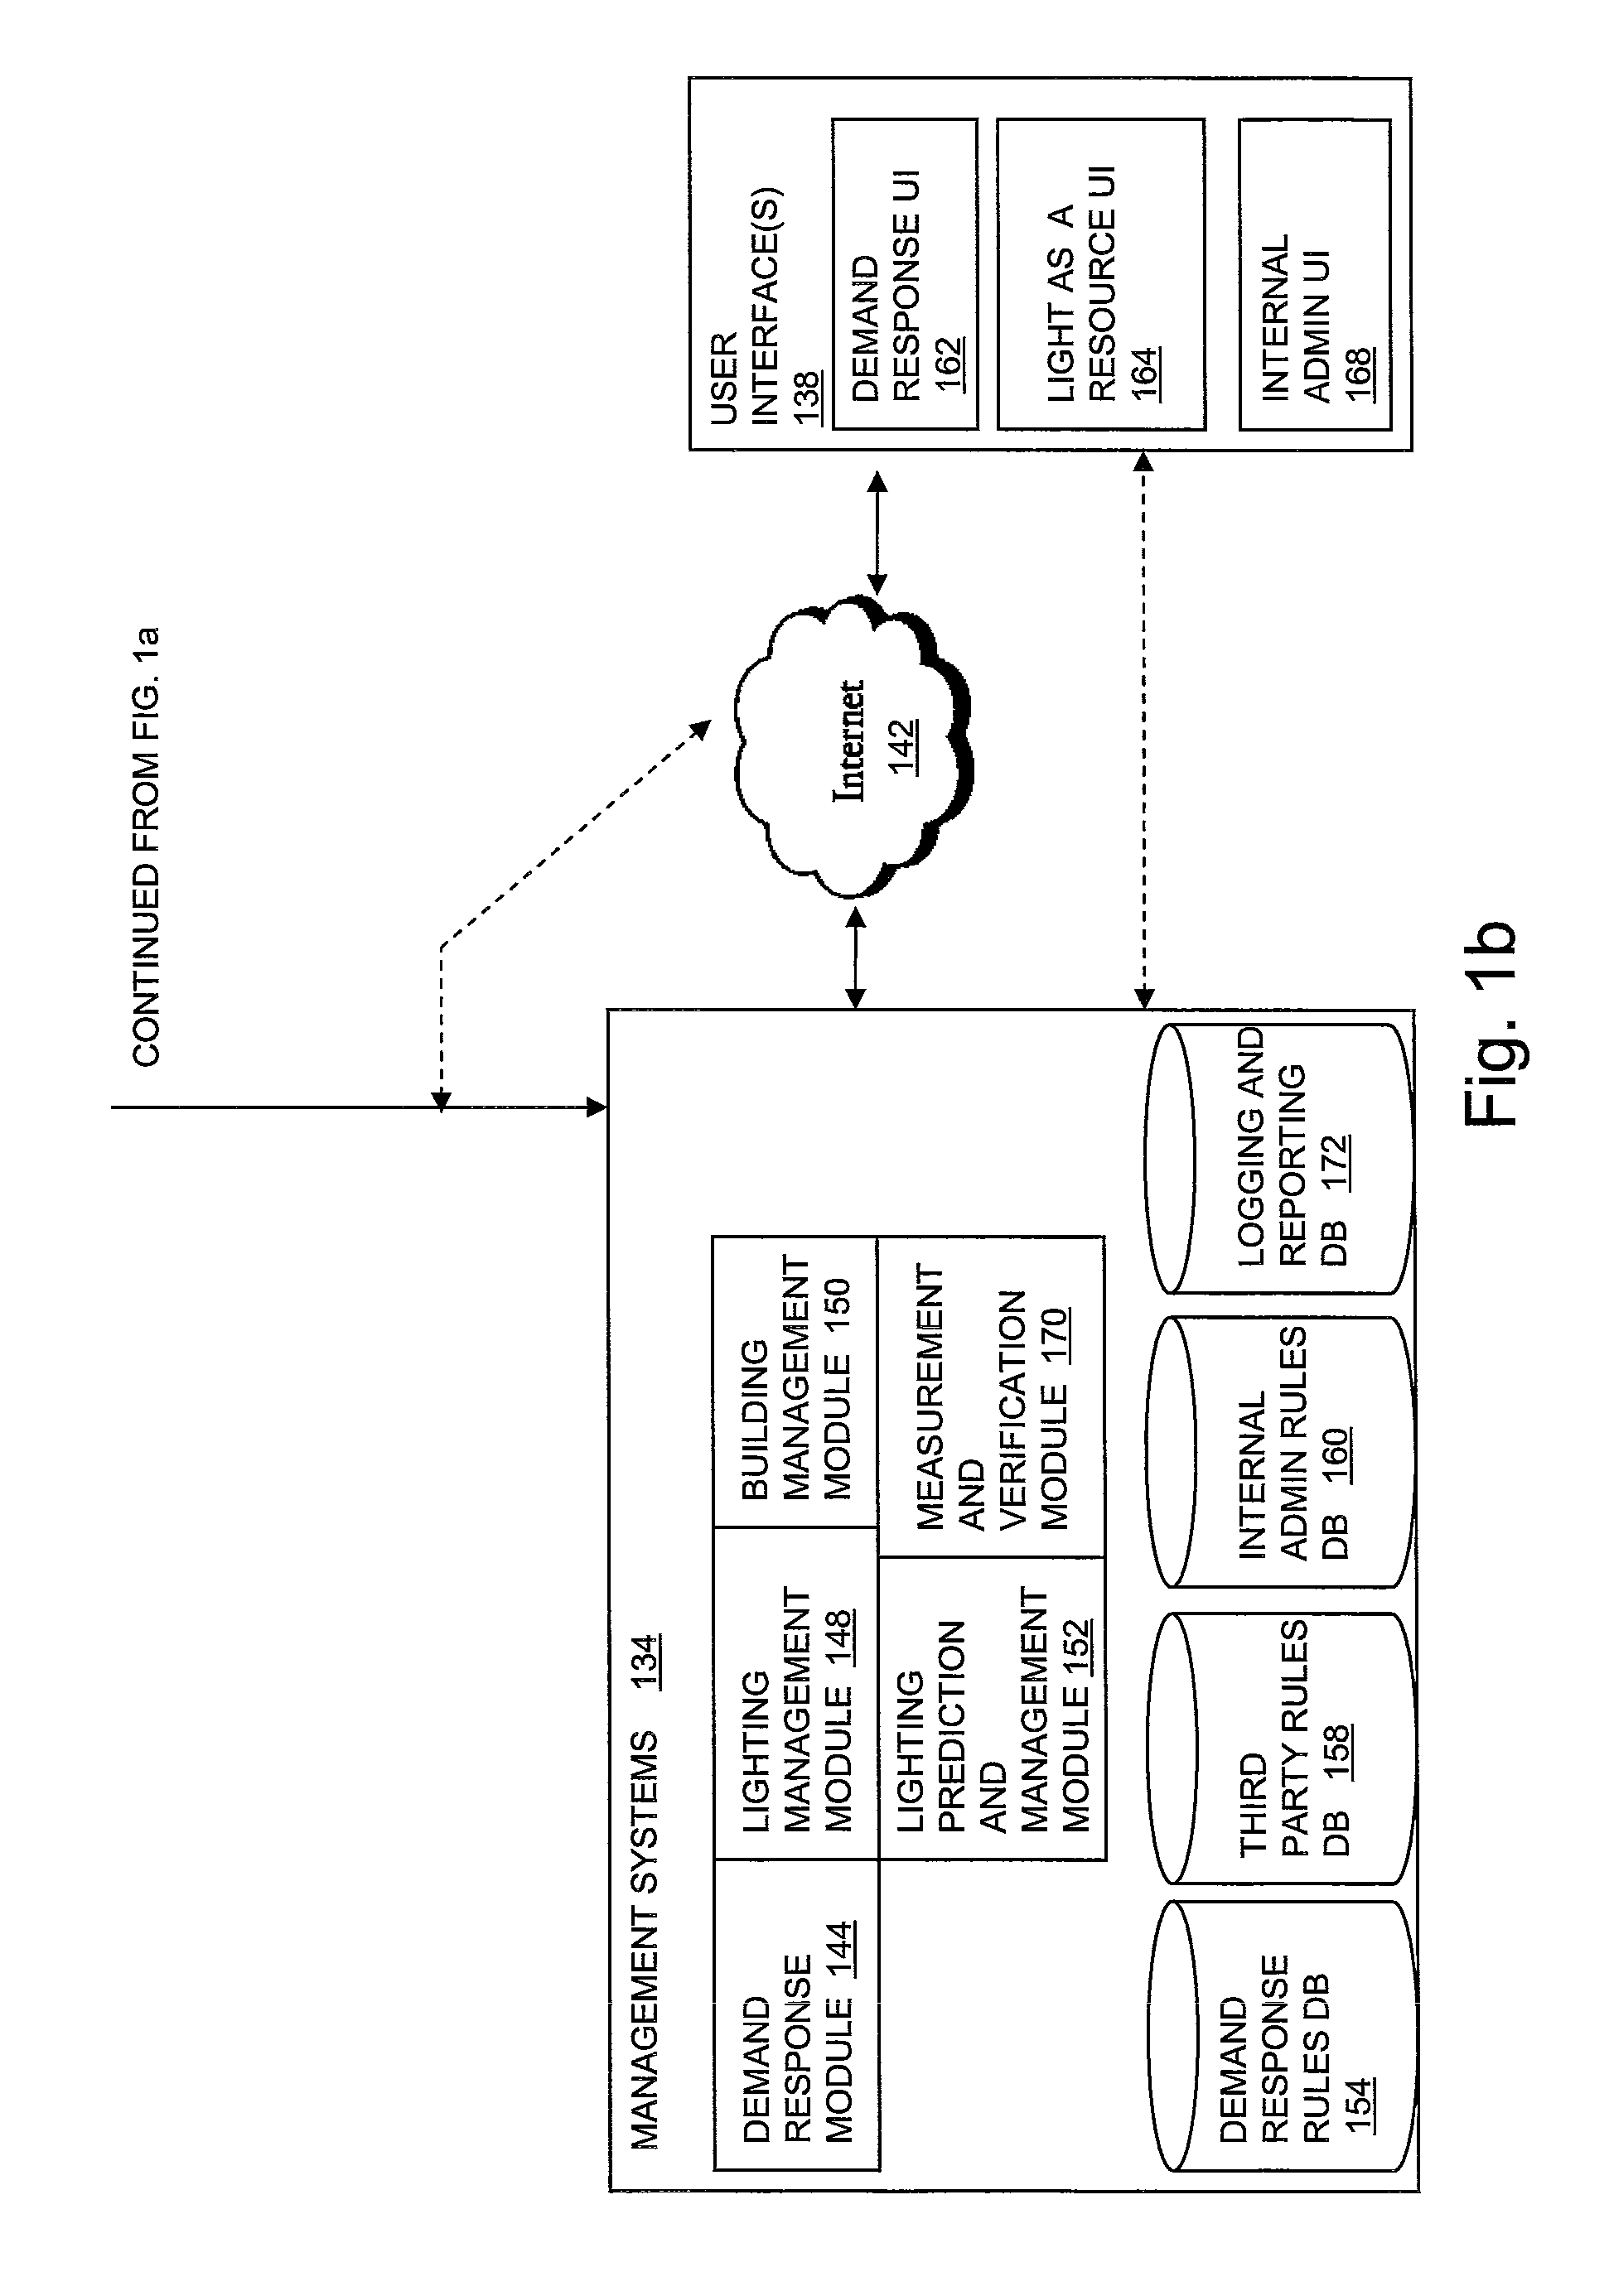 LED-based lighting methods, apparatus, and systems employing LED light bars, occupancy sensing, and local state machine